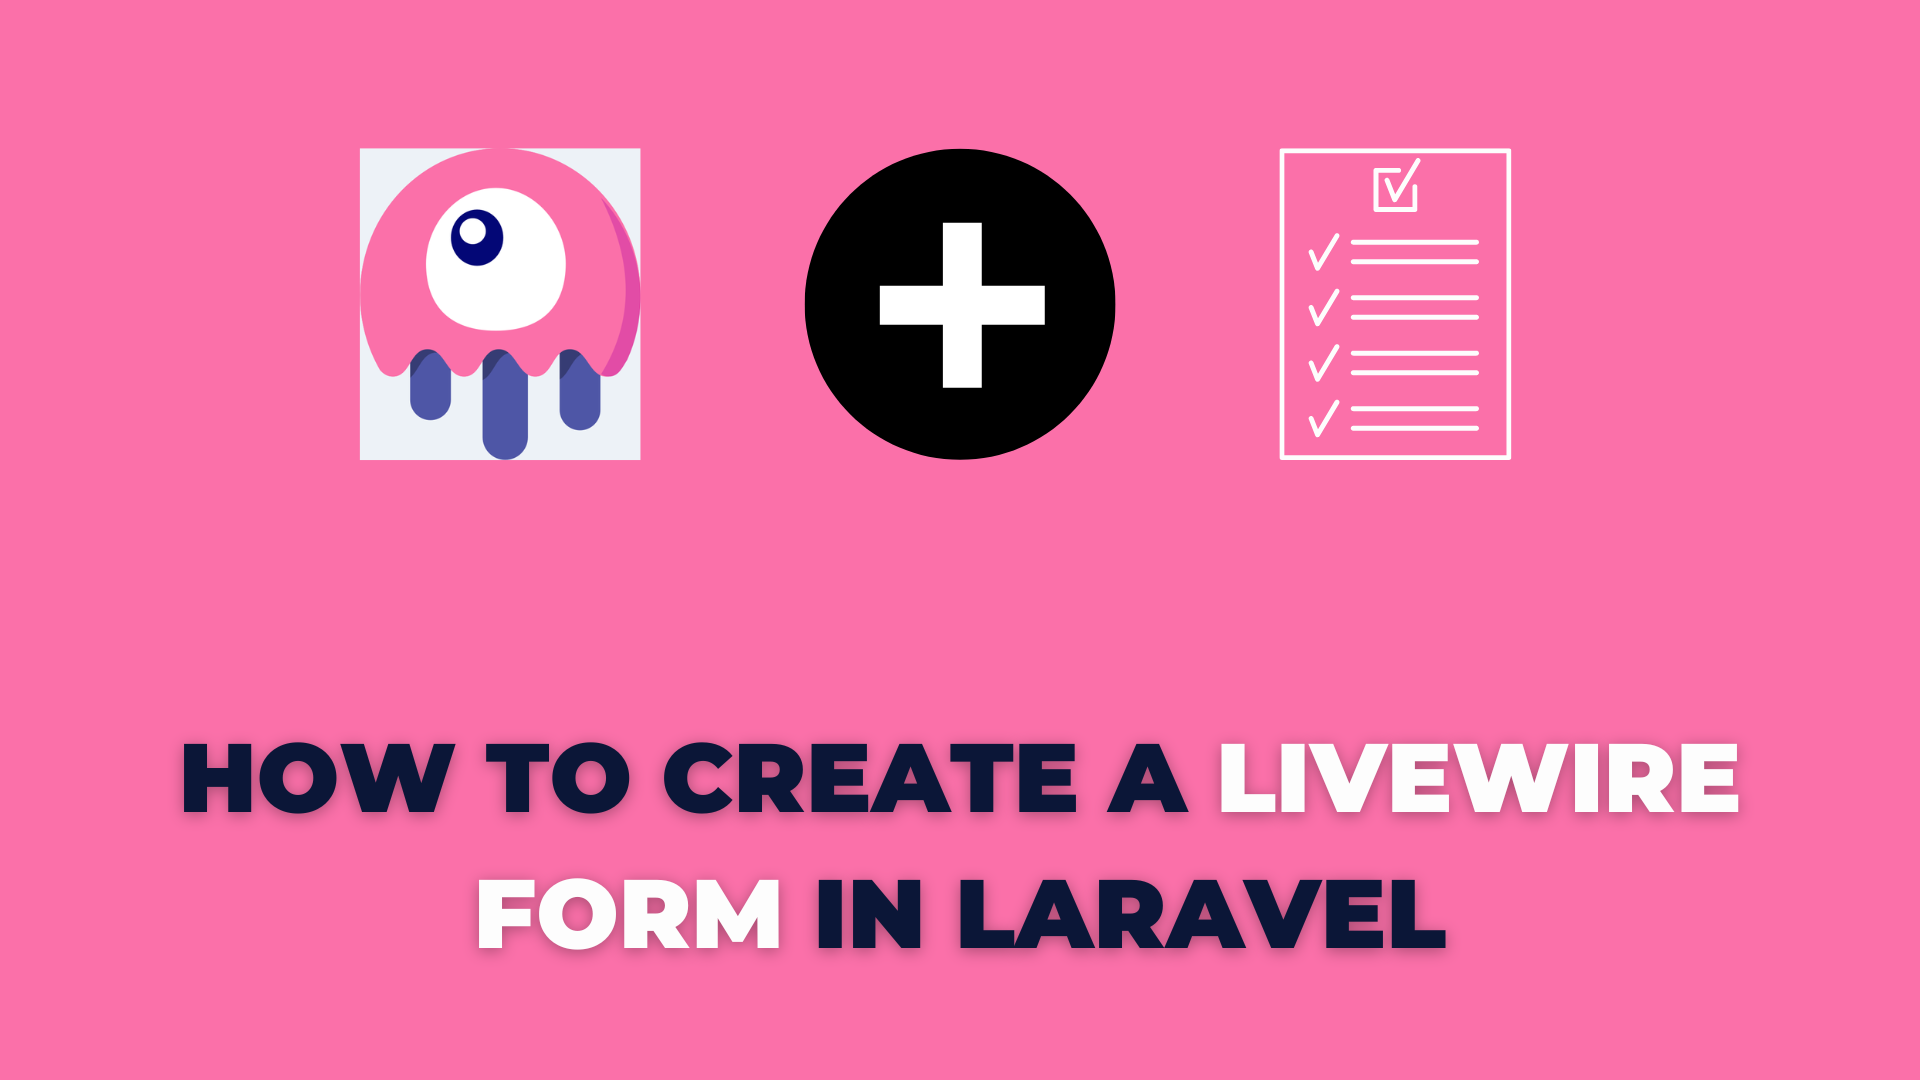 How to create a Livewire Form in Laravel